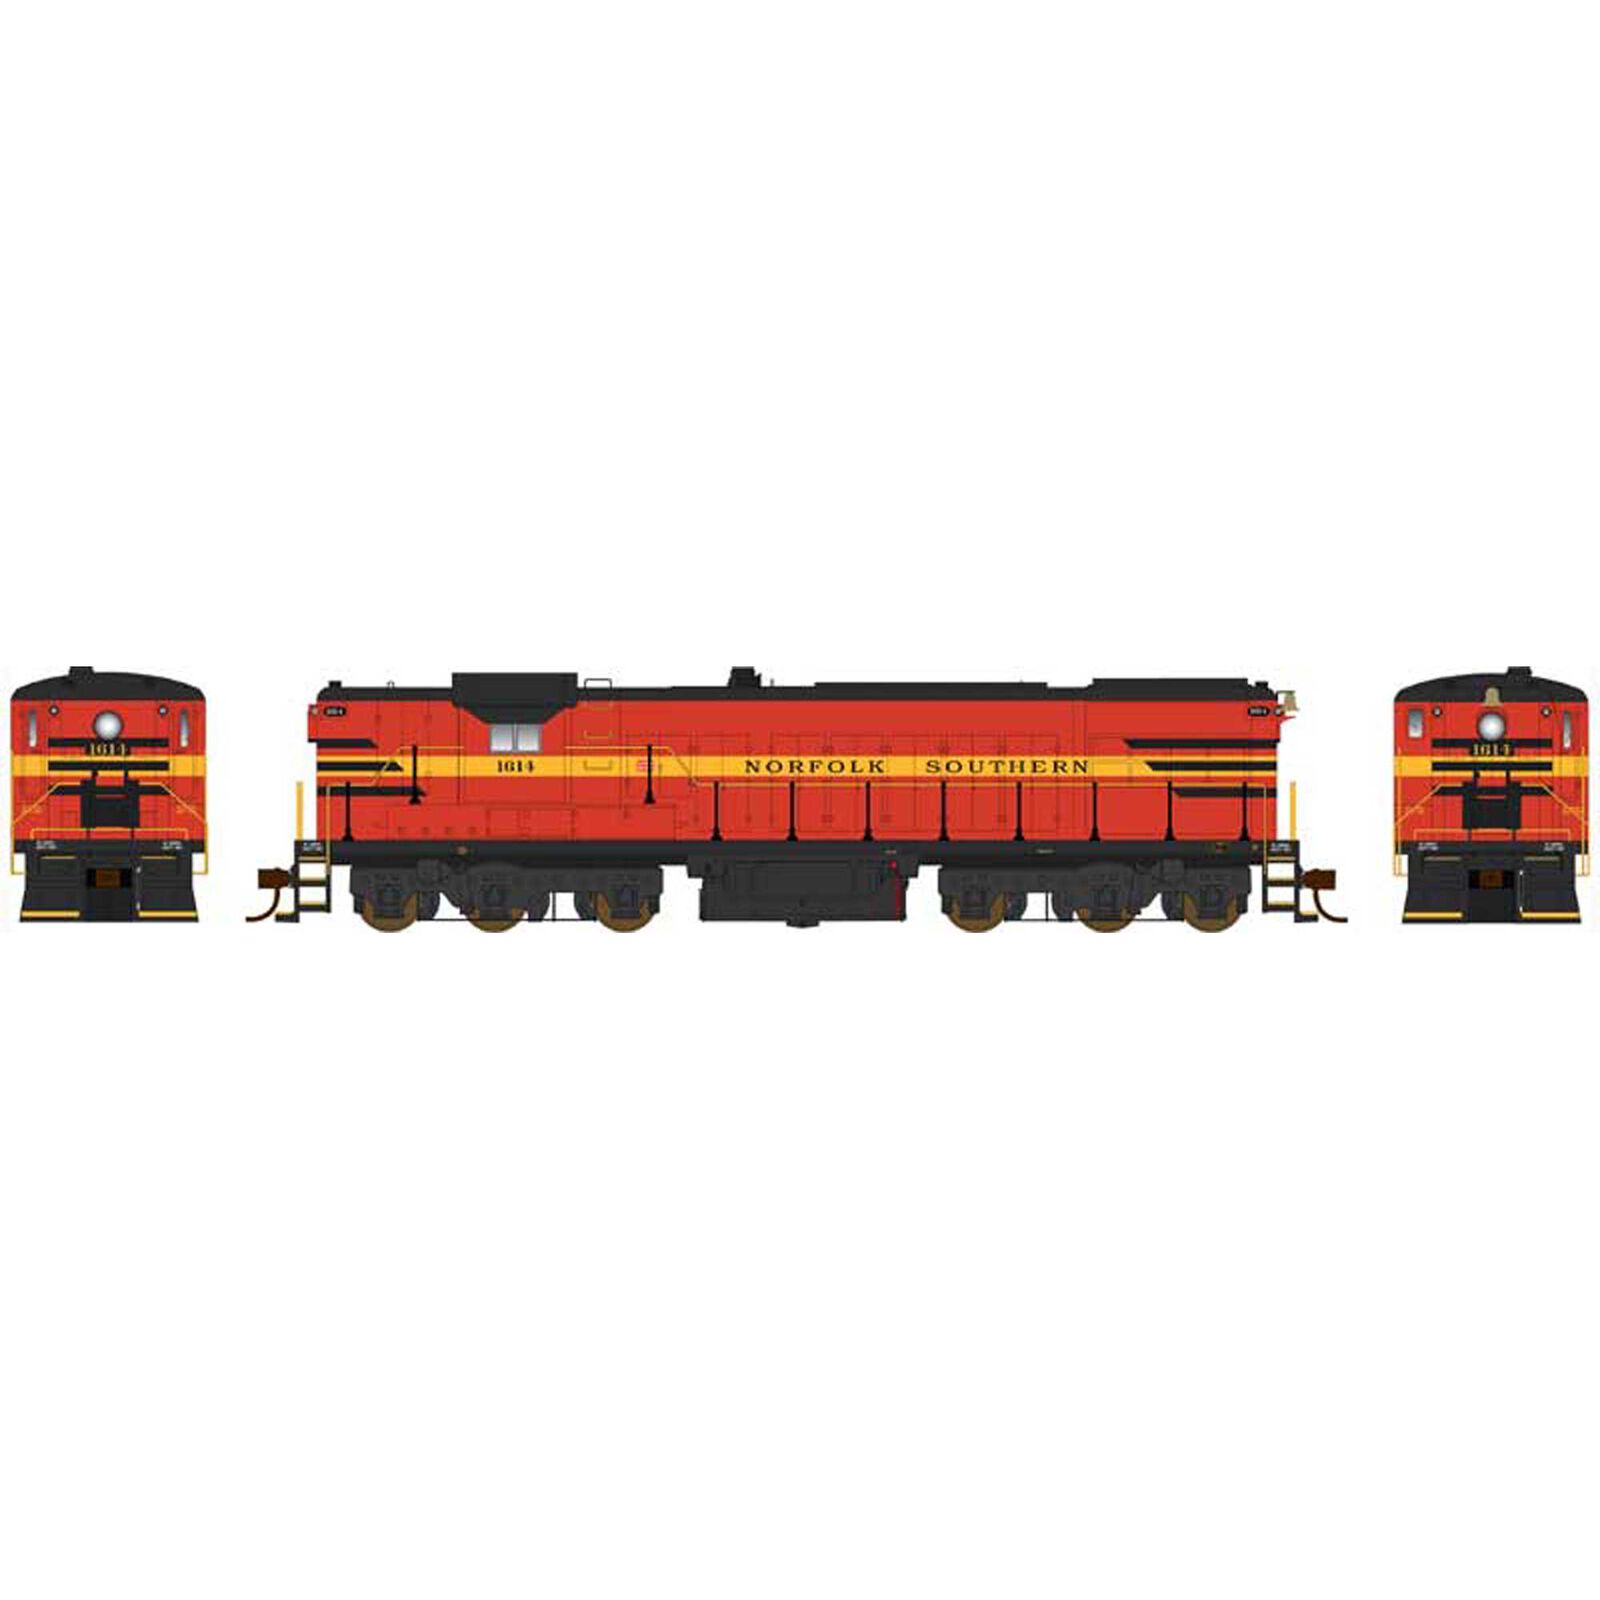 HO AS-416 NS Loco #1614 with sound